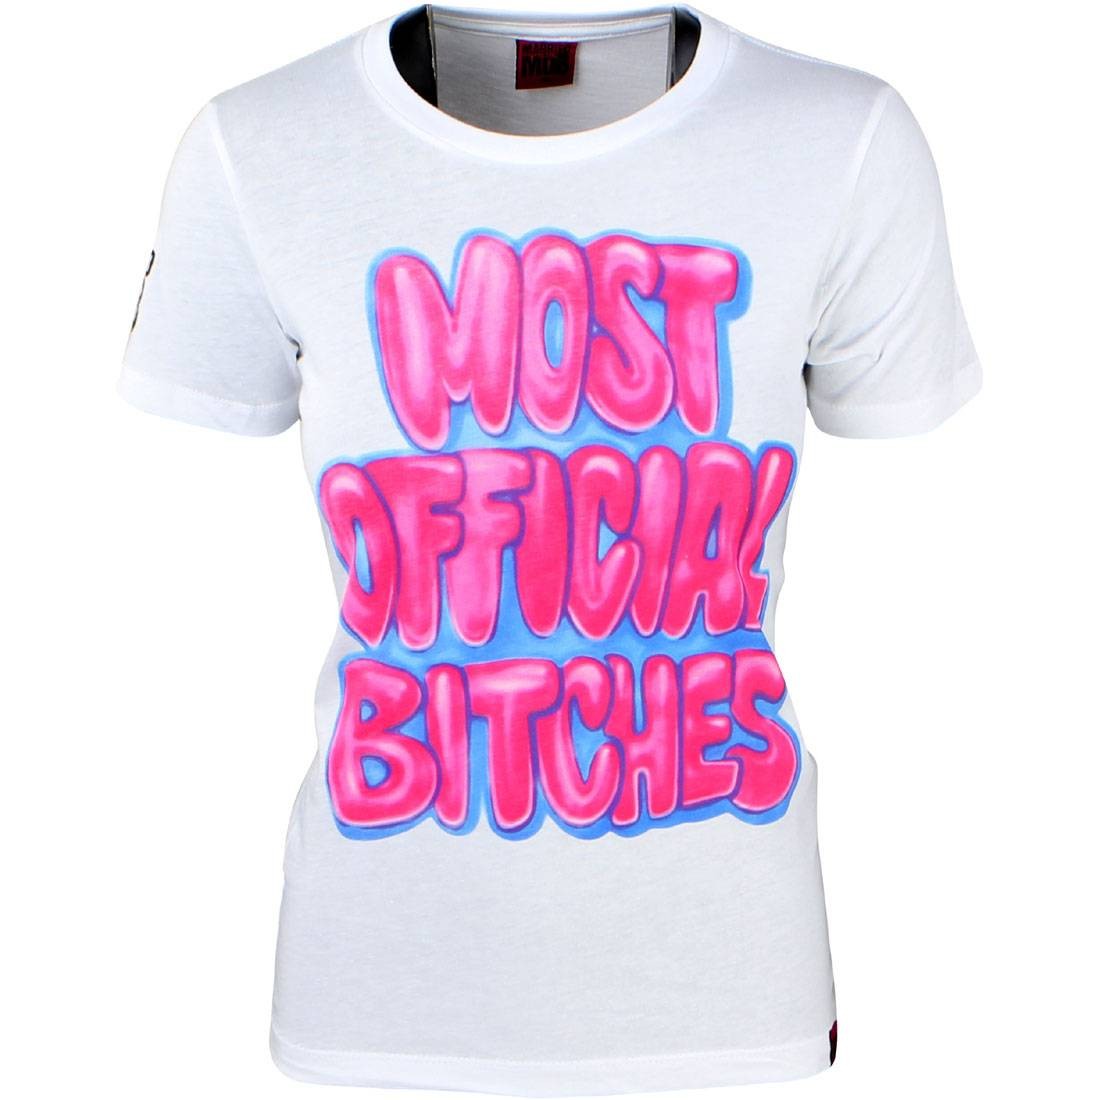 Married To The Mob Women Airbrush Tee (white / pink)